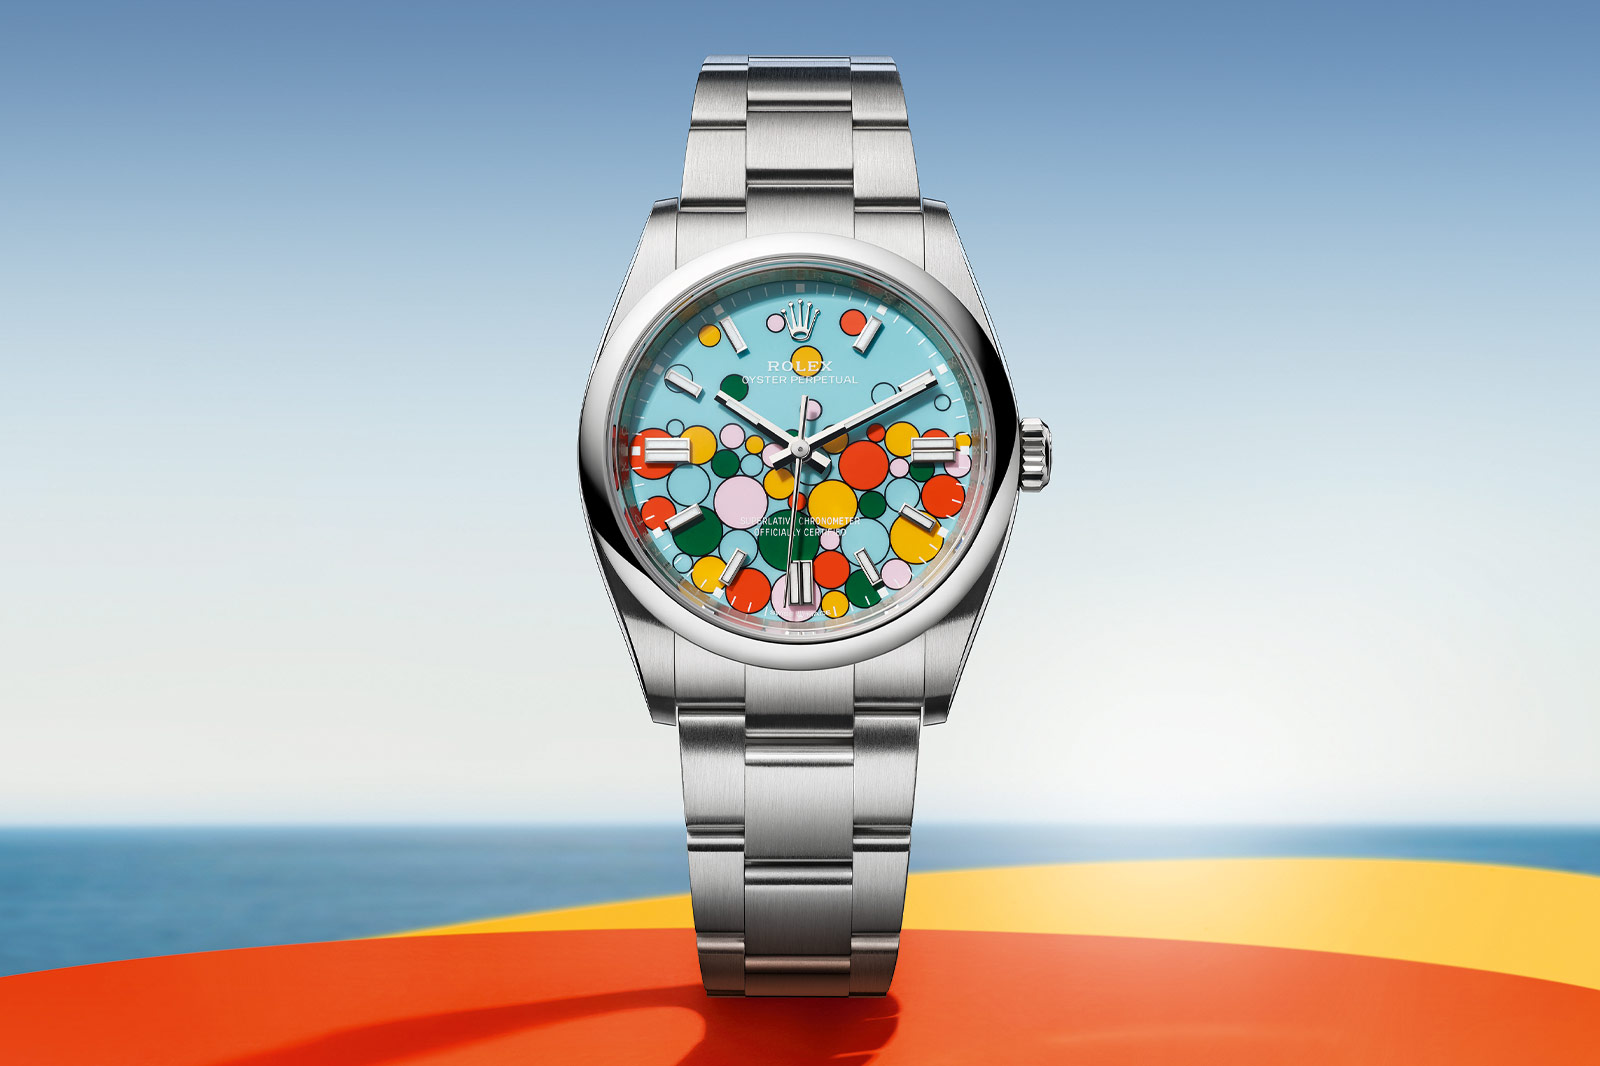 Rolex Oyster Perpetual Celebration Bubbles watch.